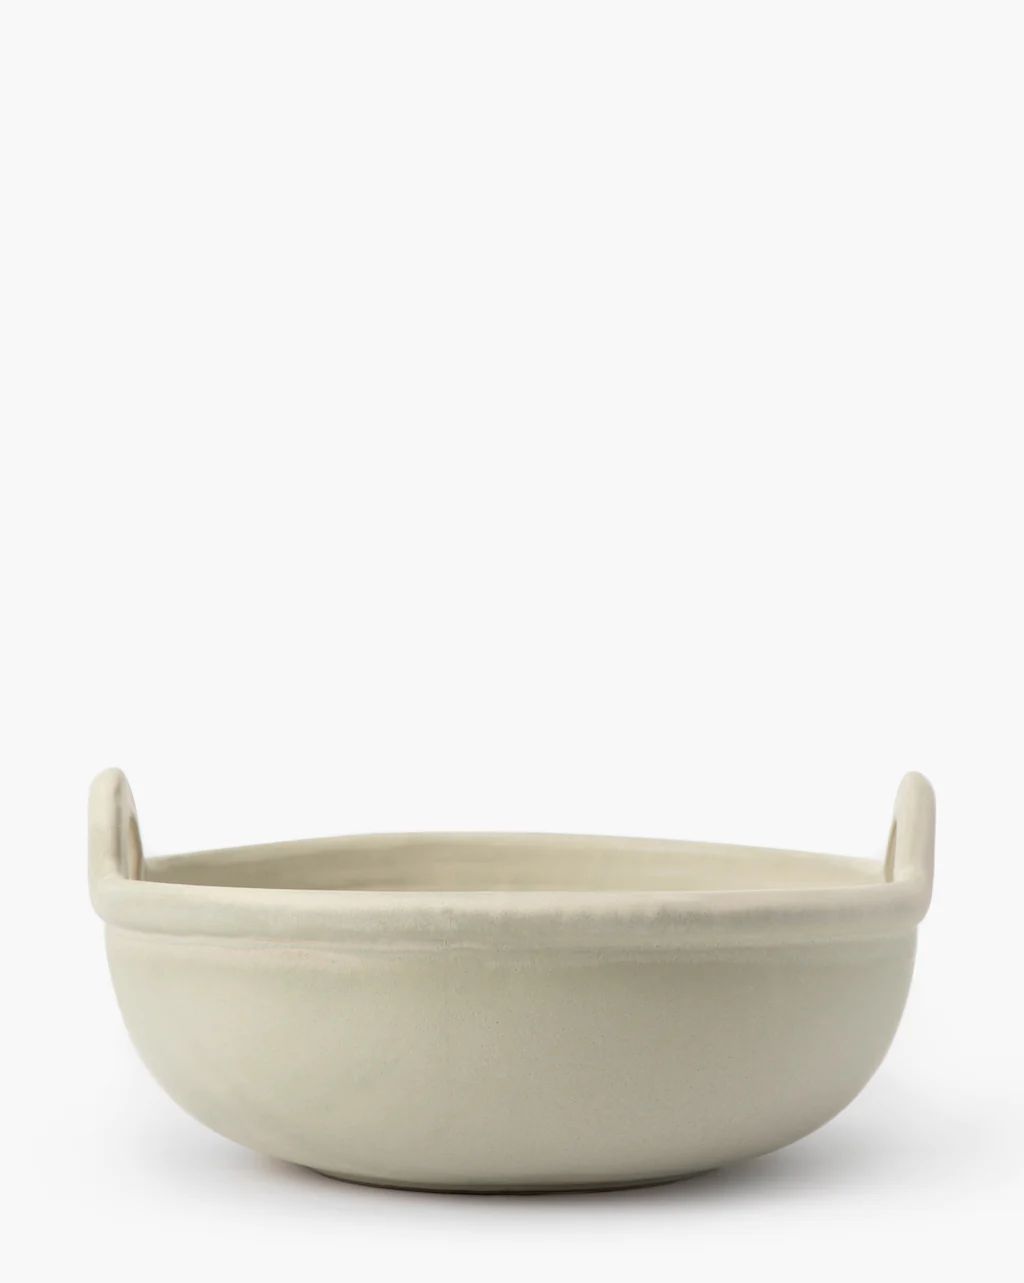 Handled Stoneware Serving Bowl | McGee & Co.